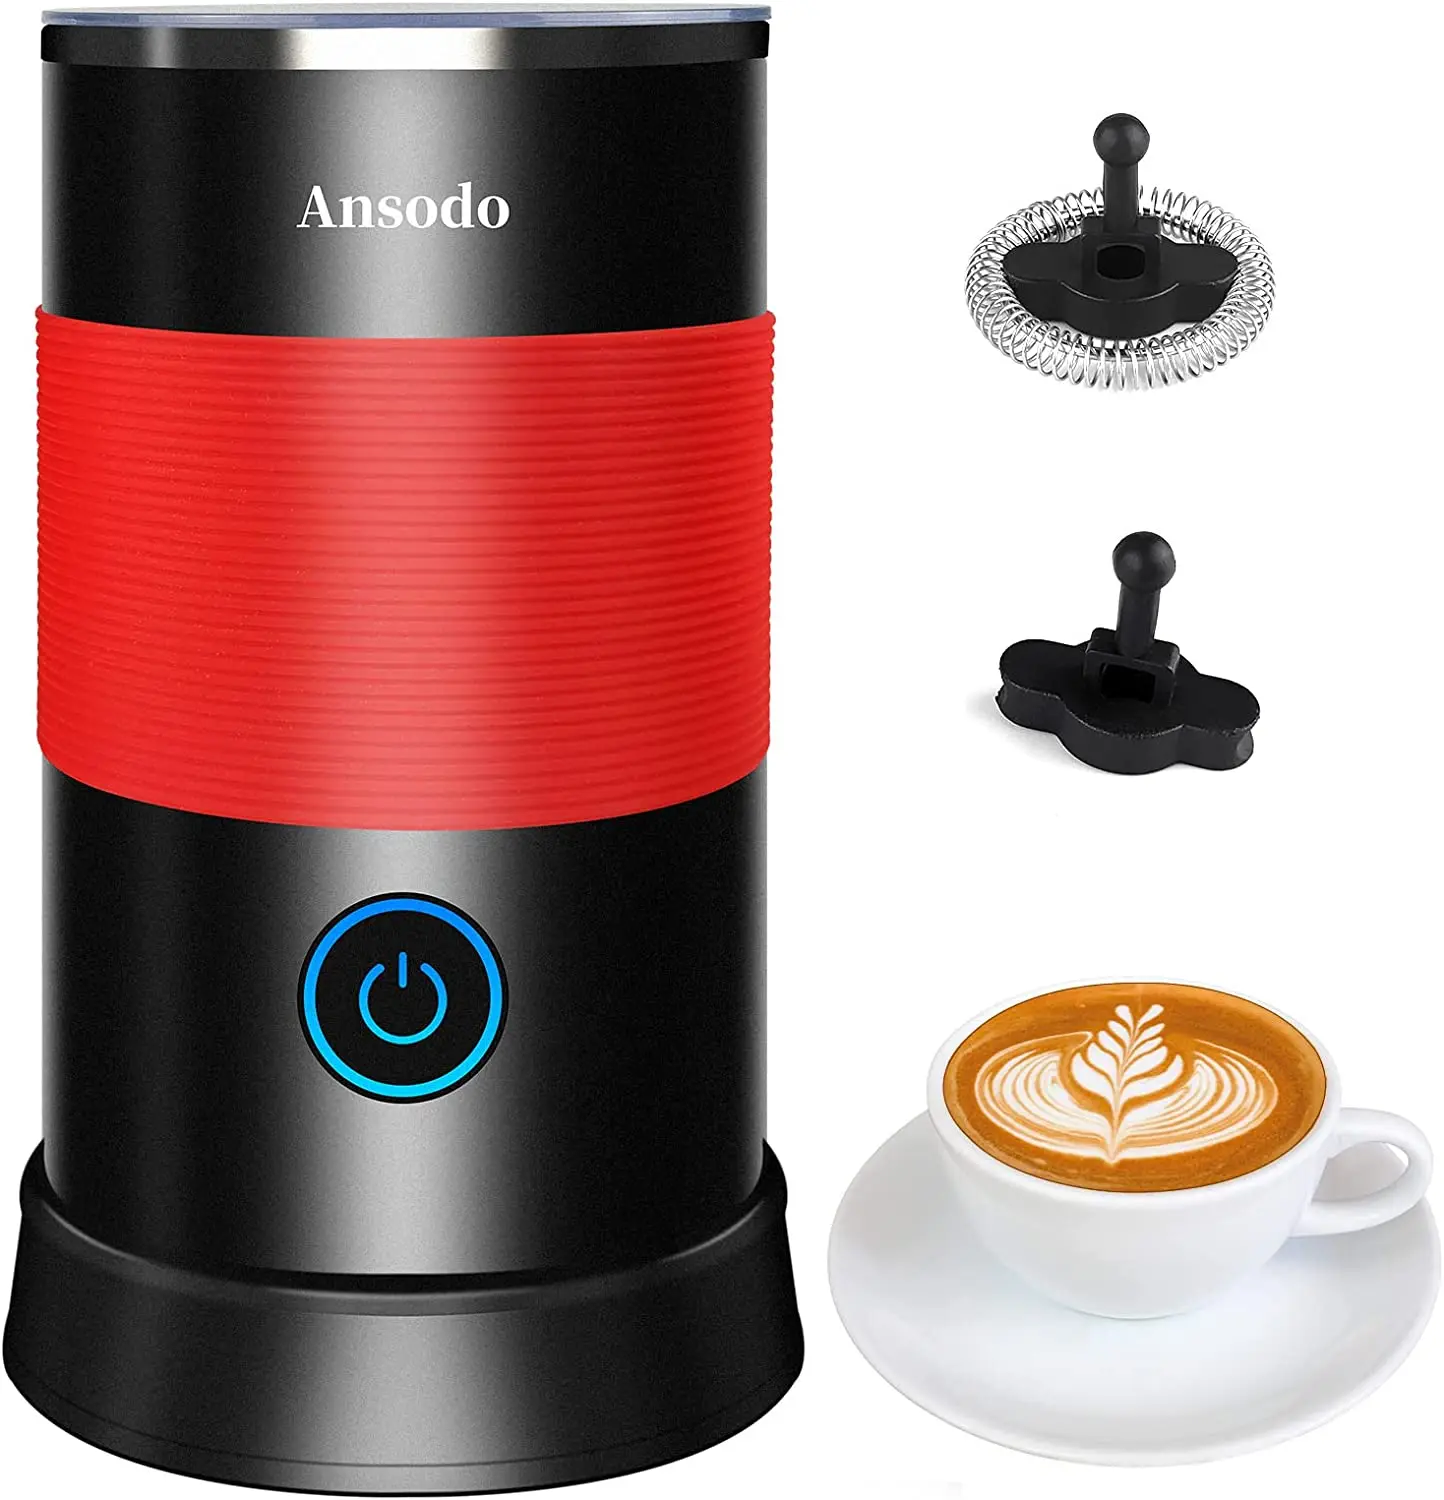 https://ae01.alicdn.com/kf/Sba4325d885c94b509859dcd4b1991e1e7/Milk-Frother-Electric-Milk-Steamer-5-in-1-Coffee-Frother-650W-240ml-Milk-Frother-Machine-for.jpg